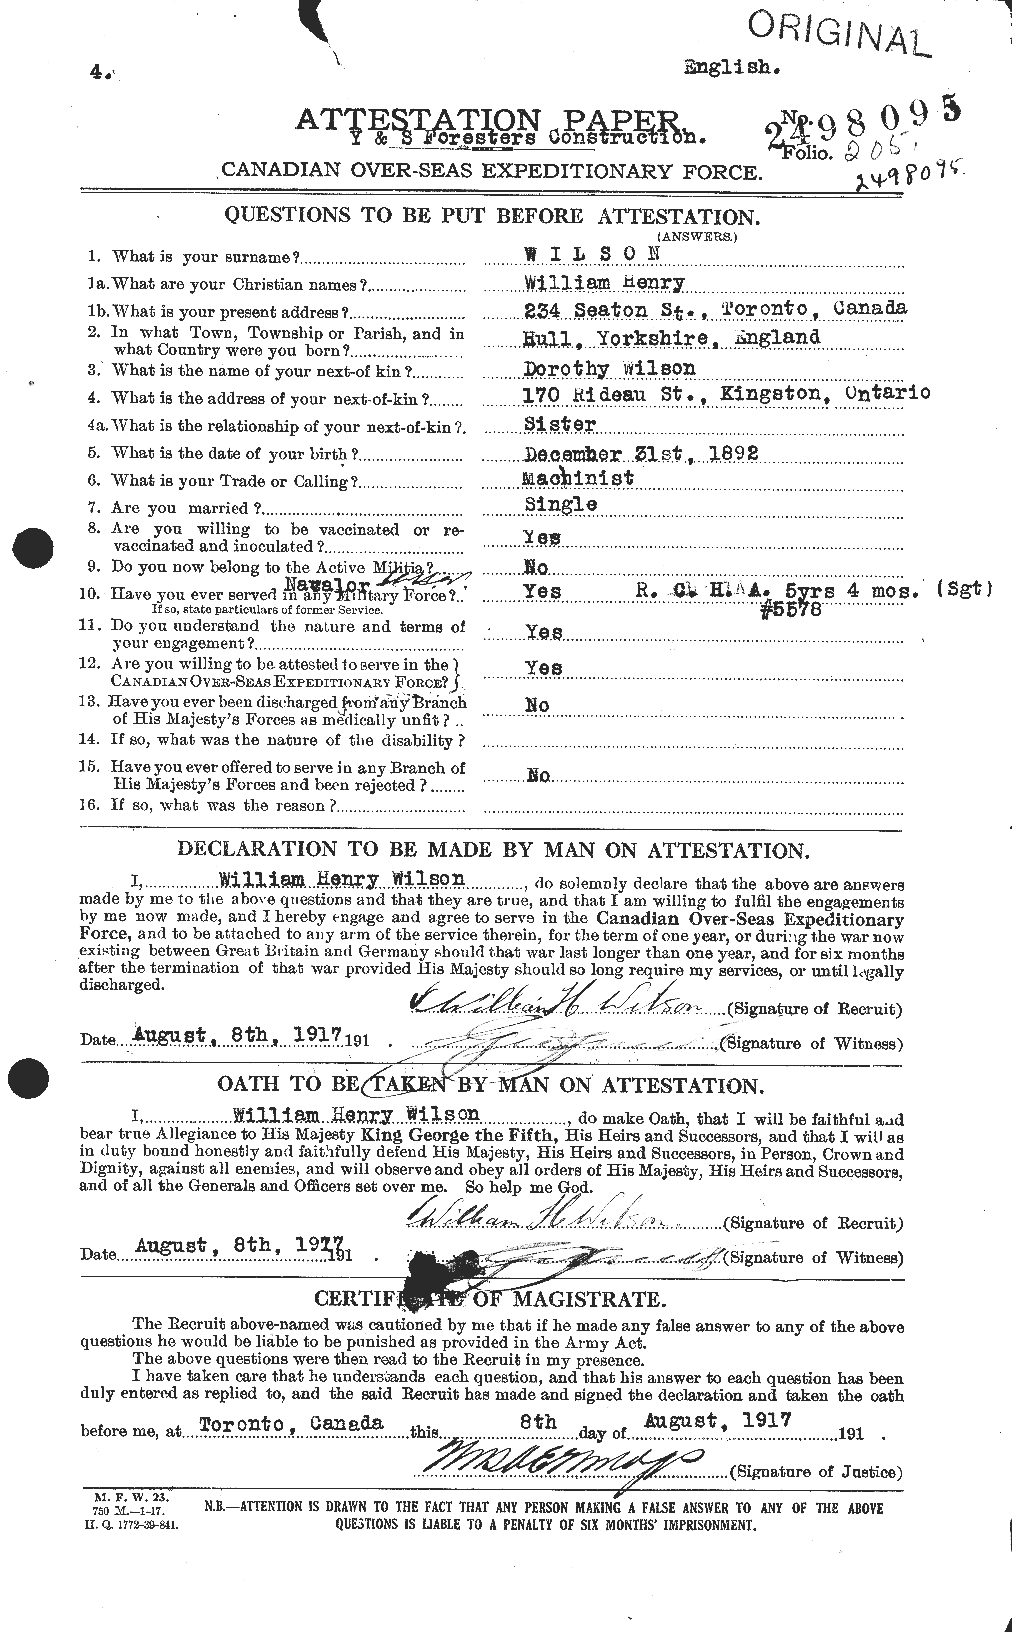 Personnel Records of the First World War - CEF 682018a